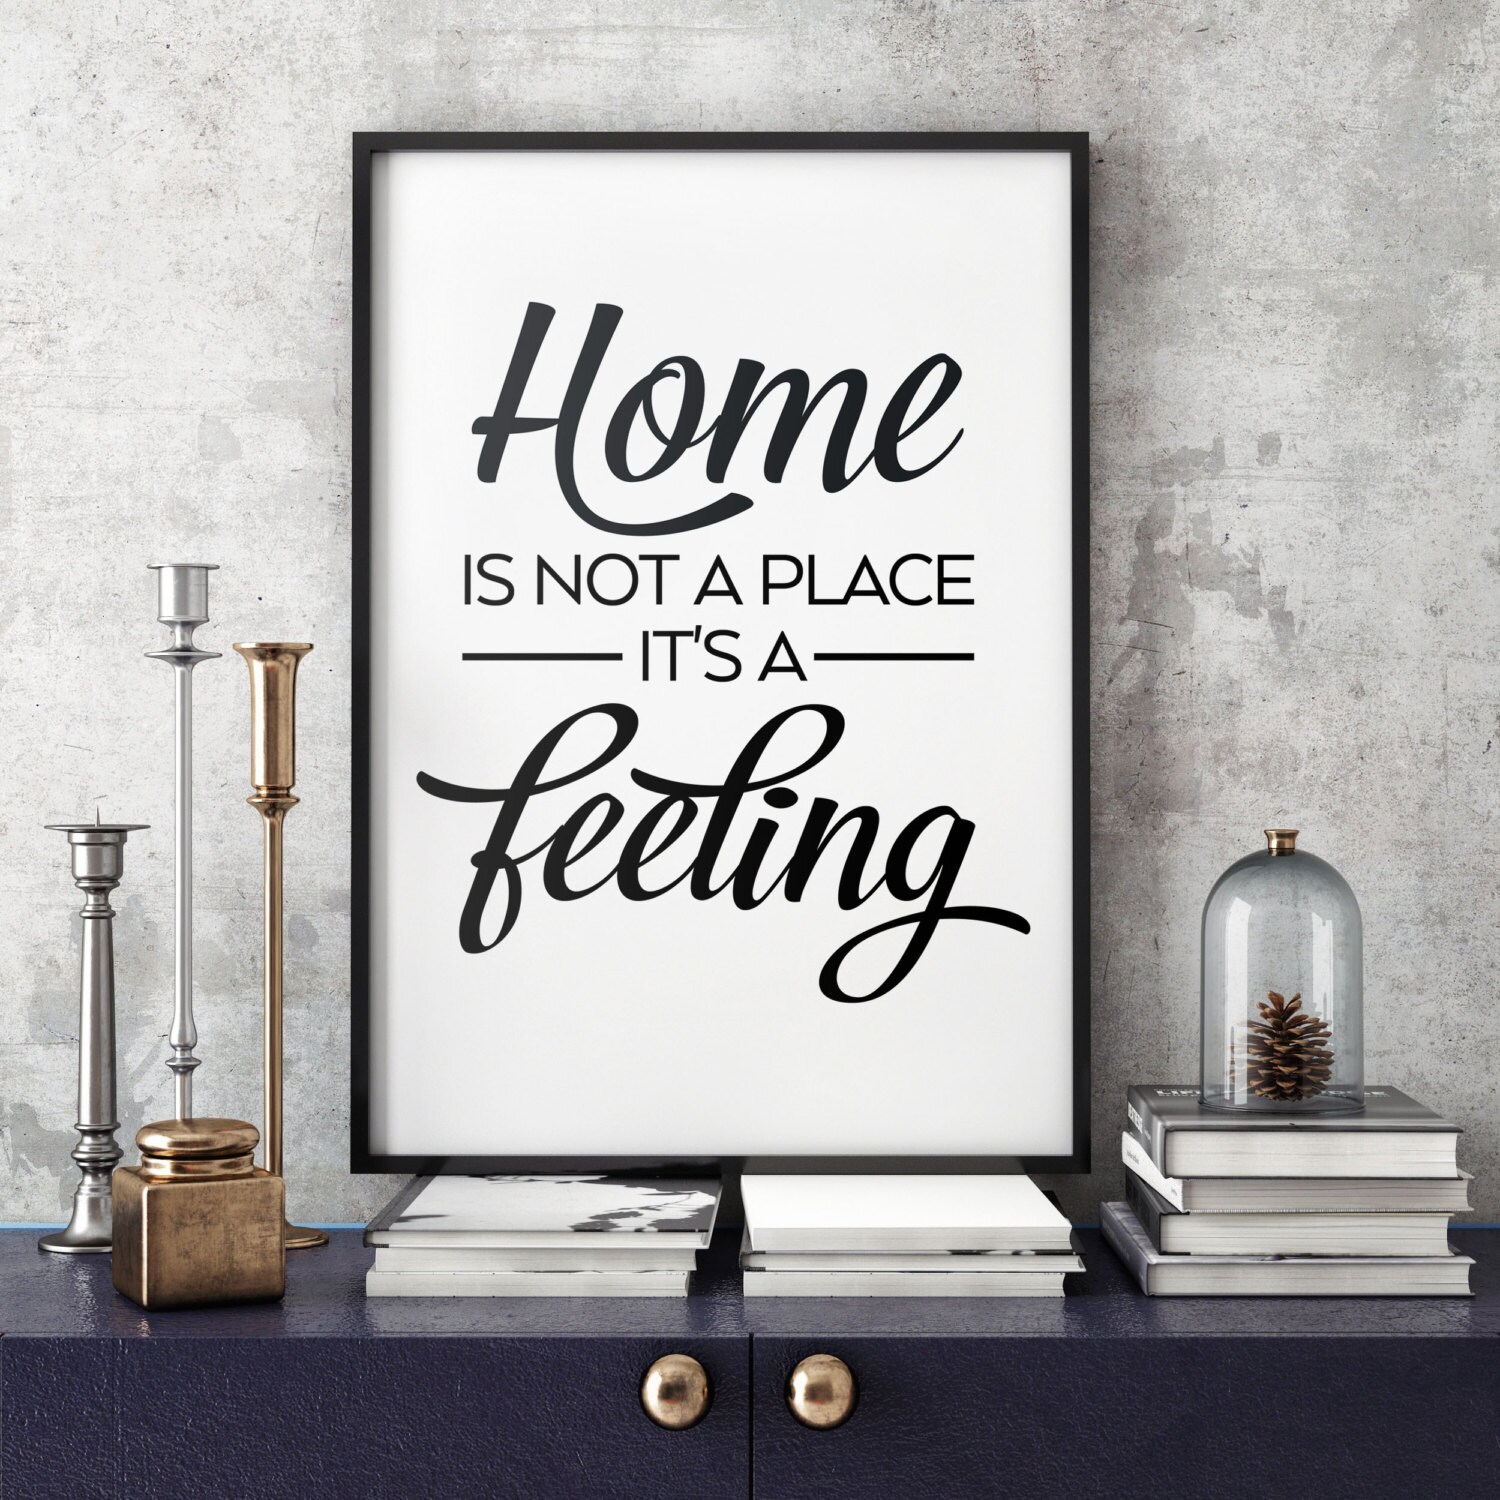 home is not a place it's a feeling essay